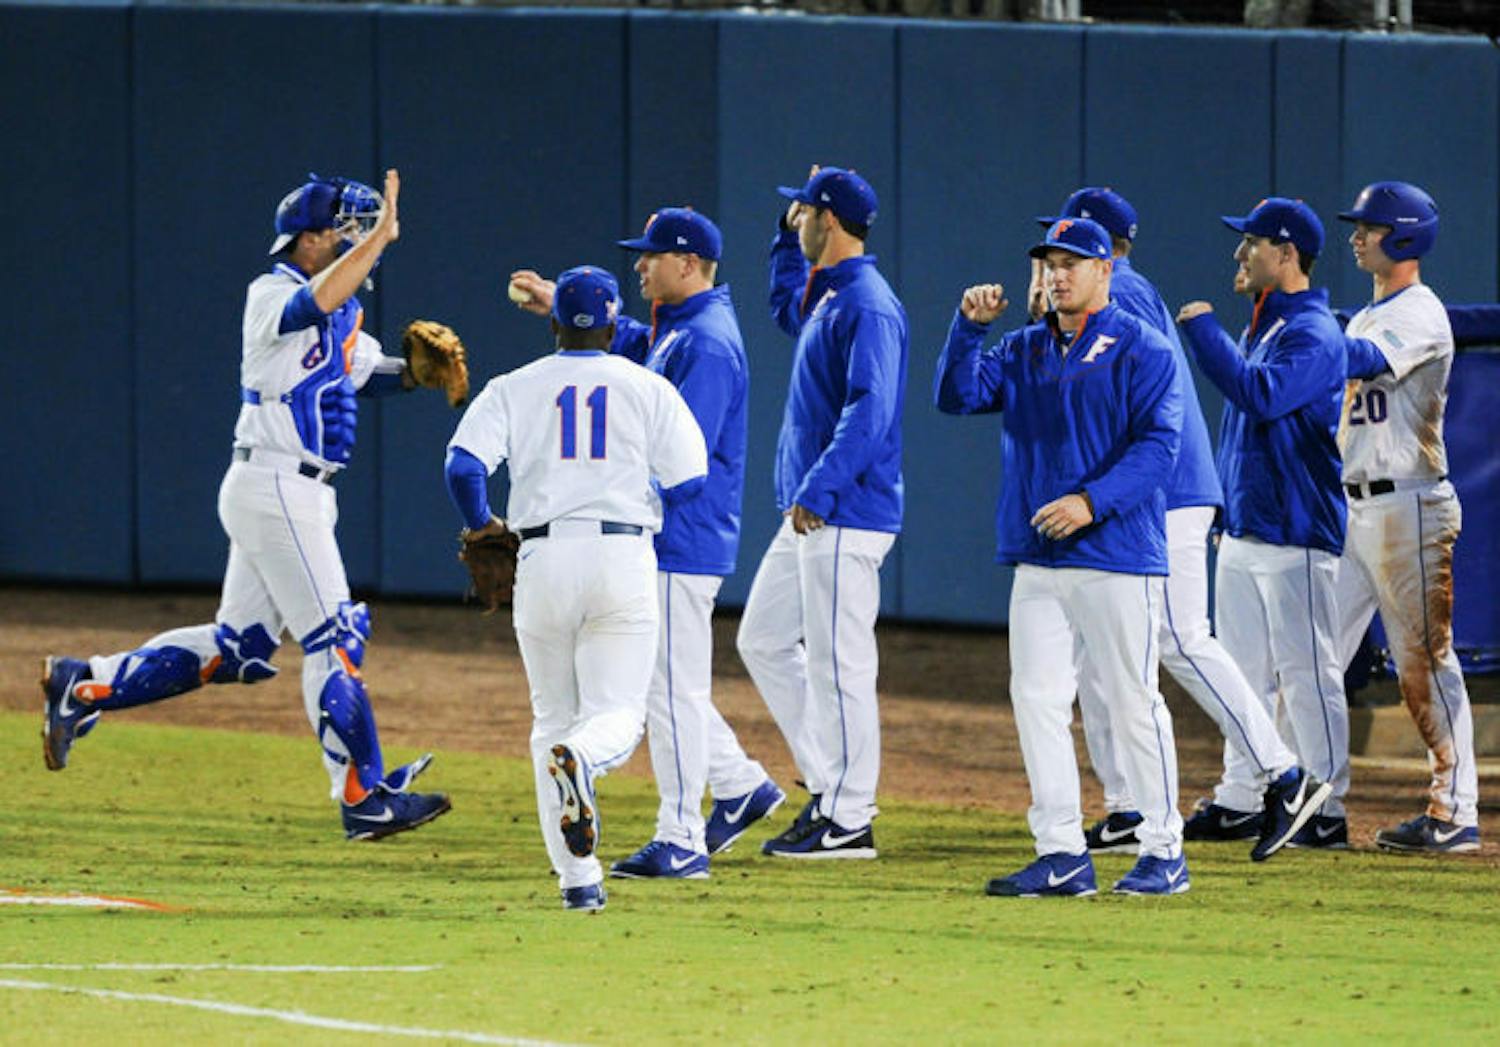 Florida celebrates after an inning during it’s 4-0 win against Maryland on Feb. 14 at McKethan Stadium.